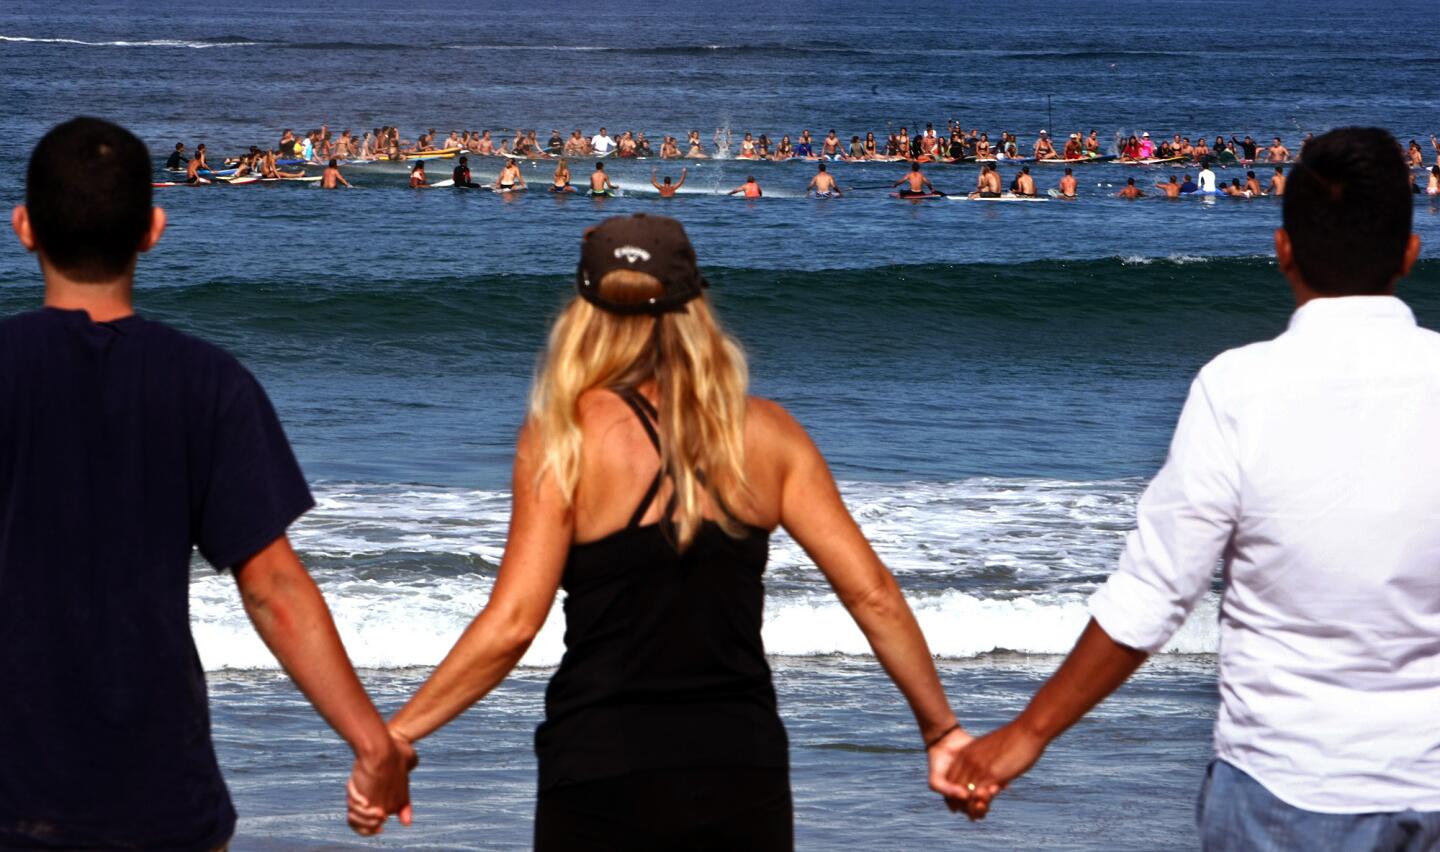 Close to 300 people, on surfboards and on land, participate in a paddle out and memorial for Mason Zisette at Manhattan Beach.